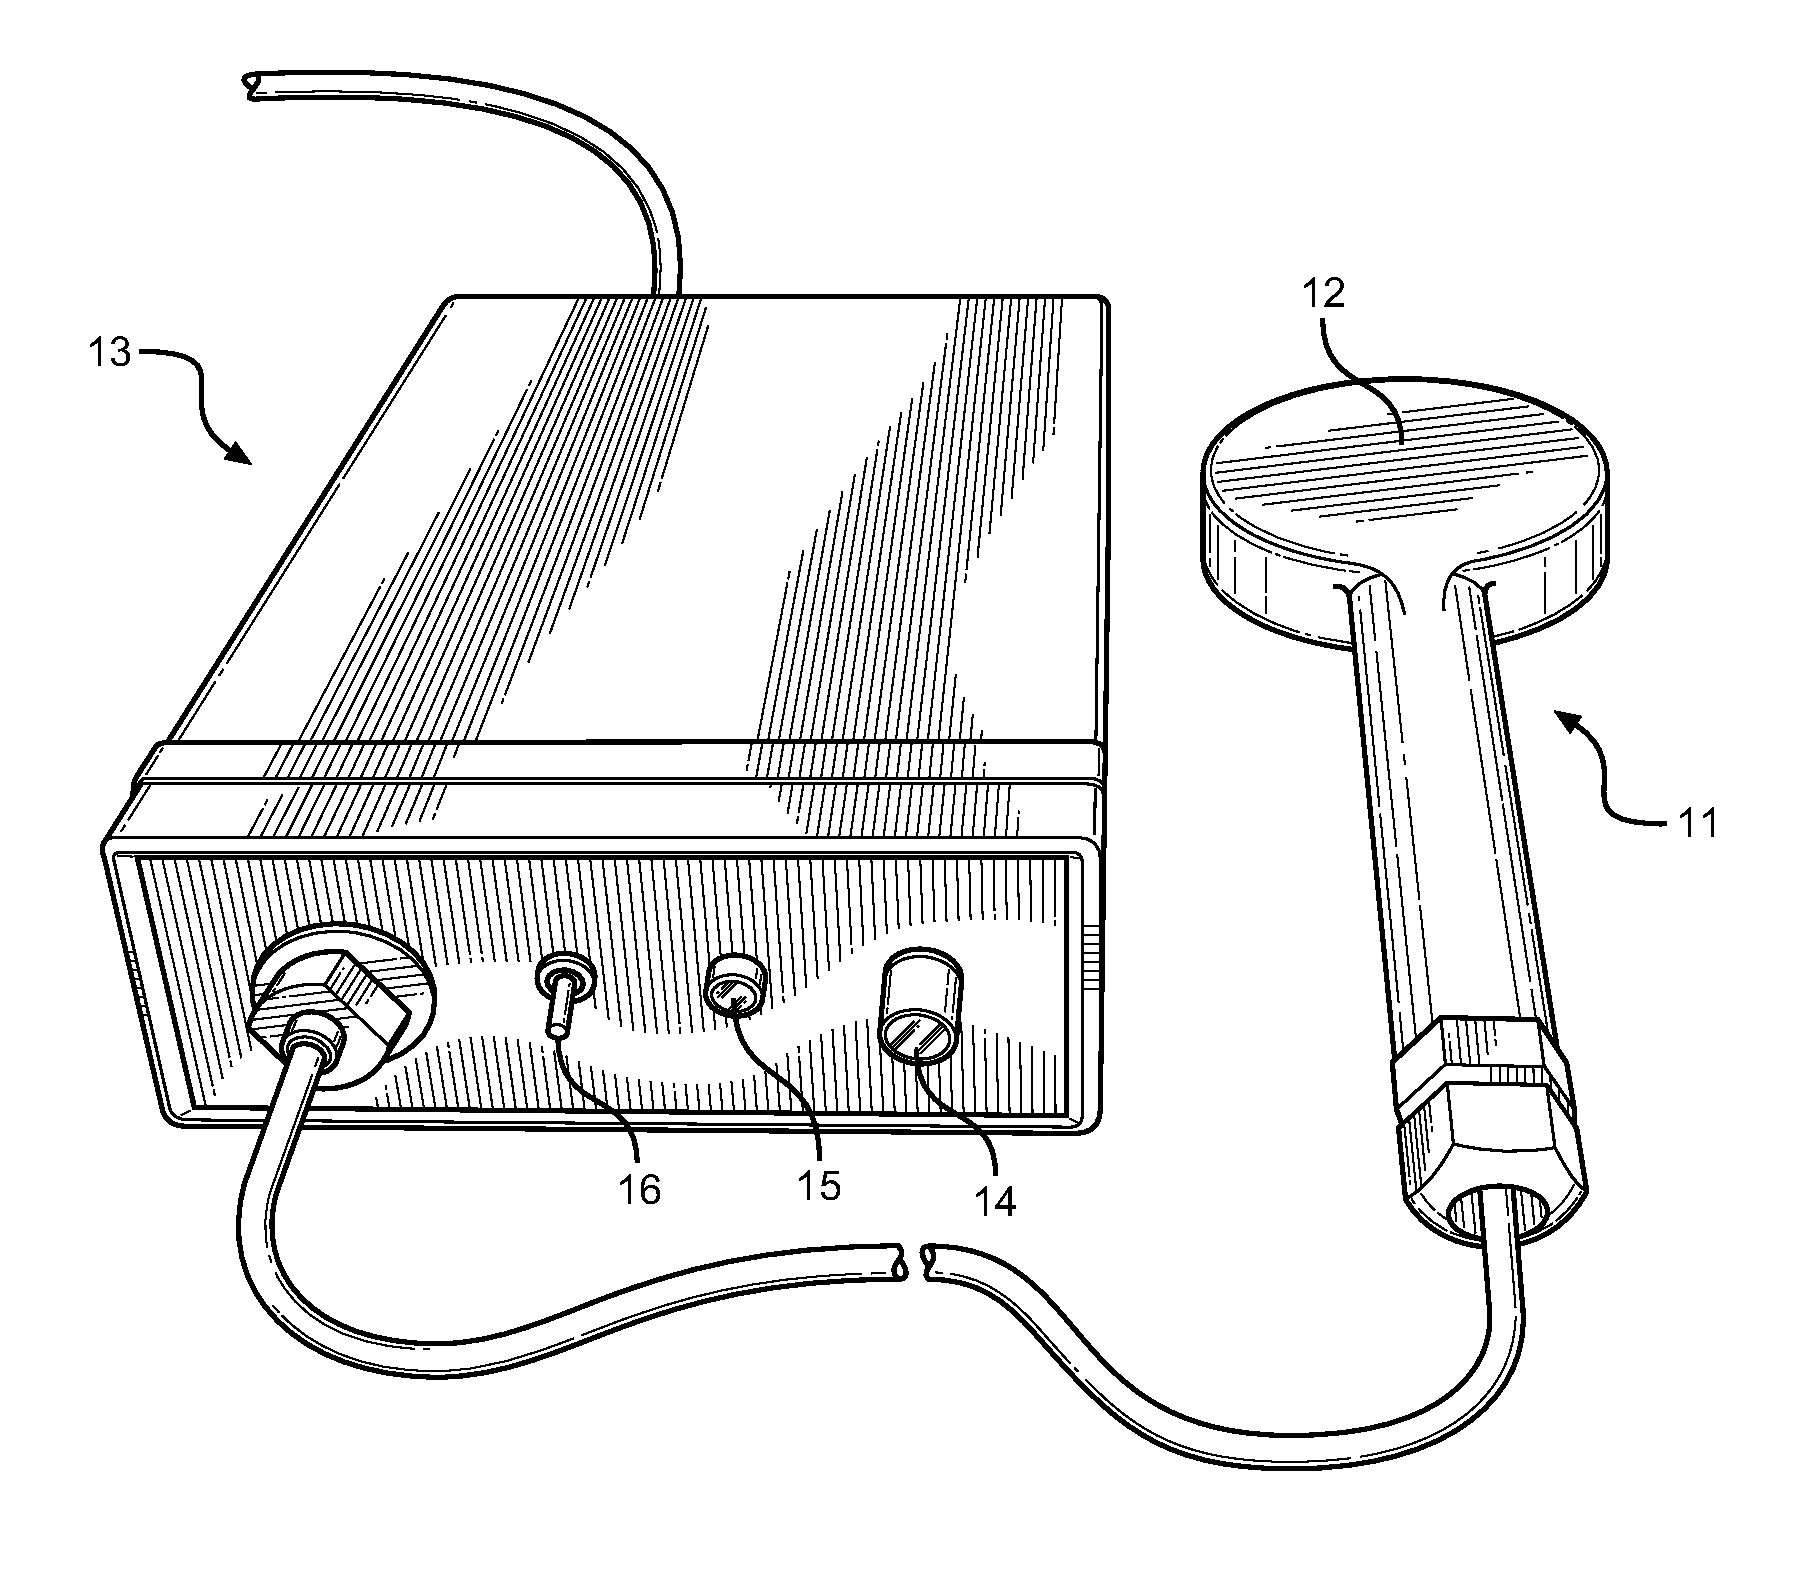 Pulsed Magnetic Therapy Device